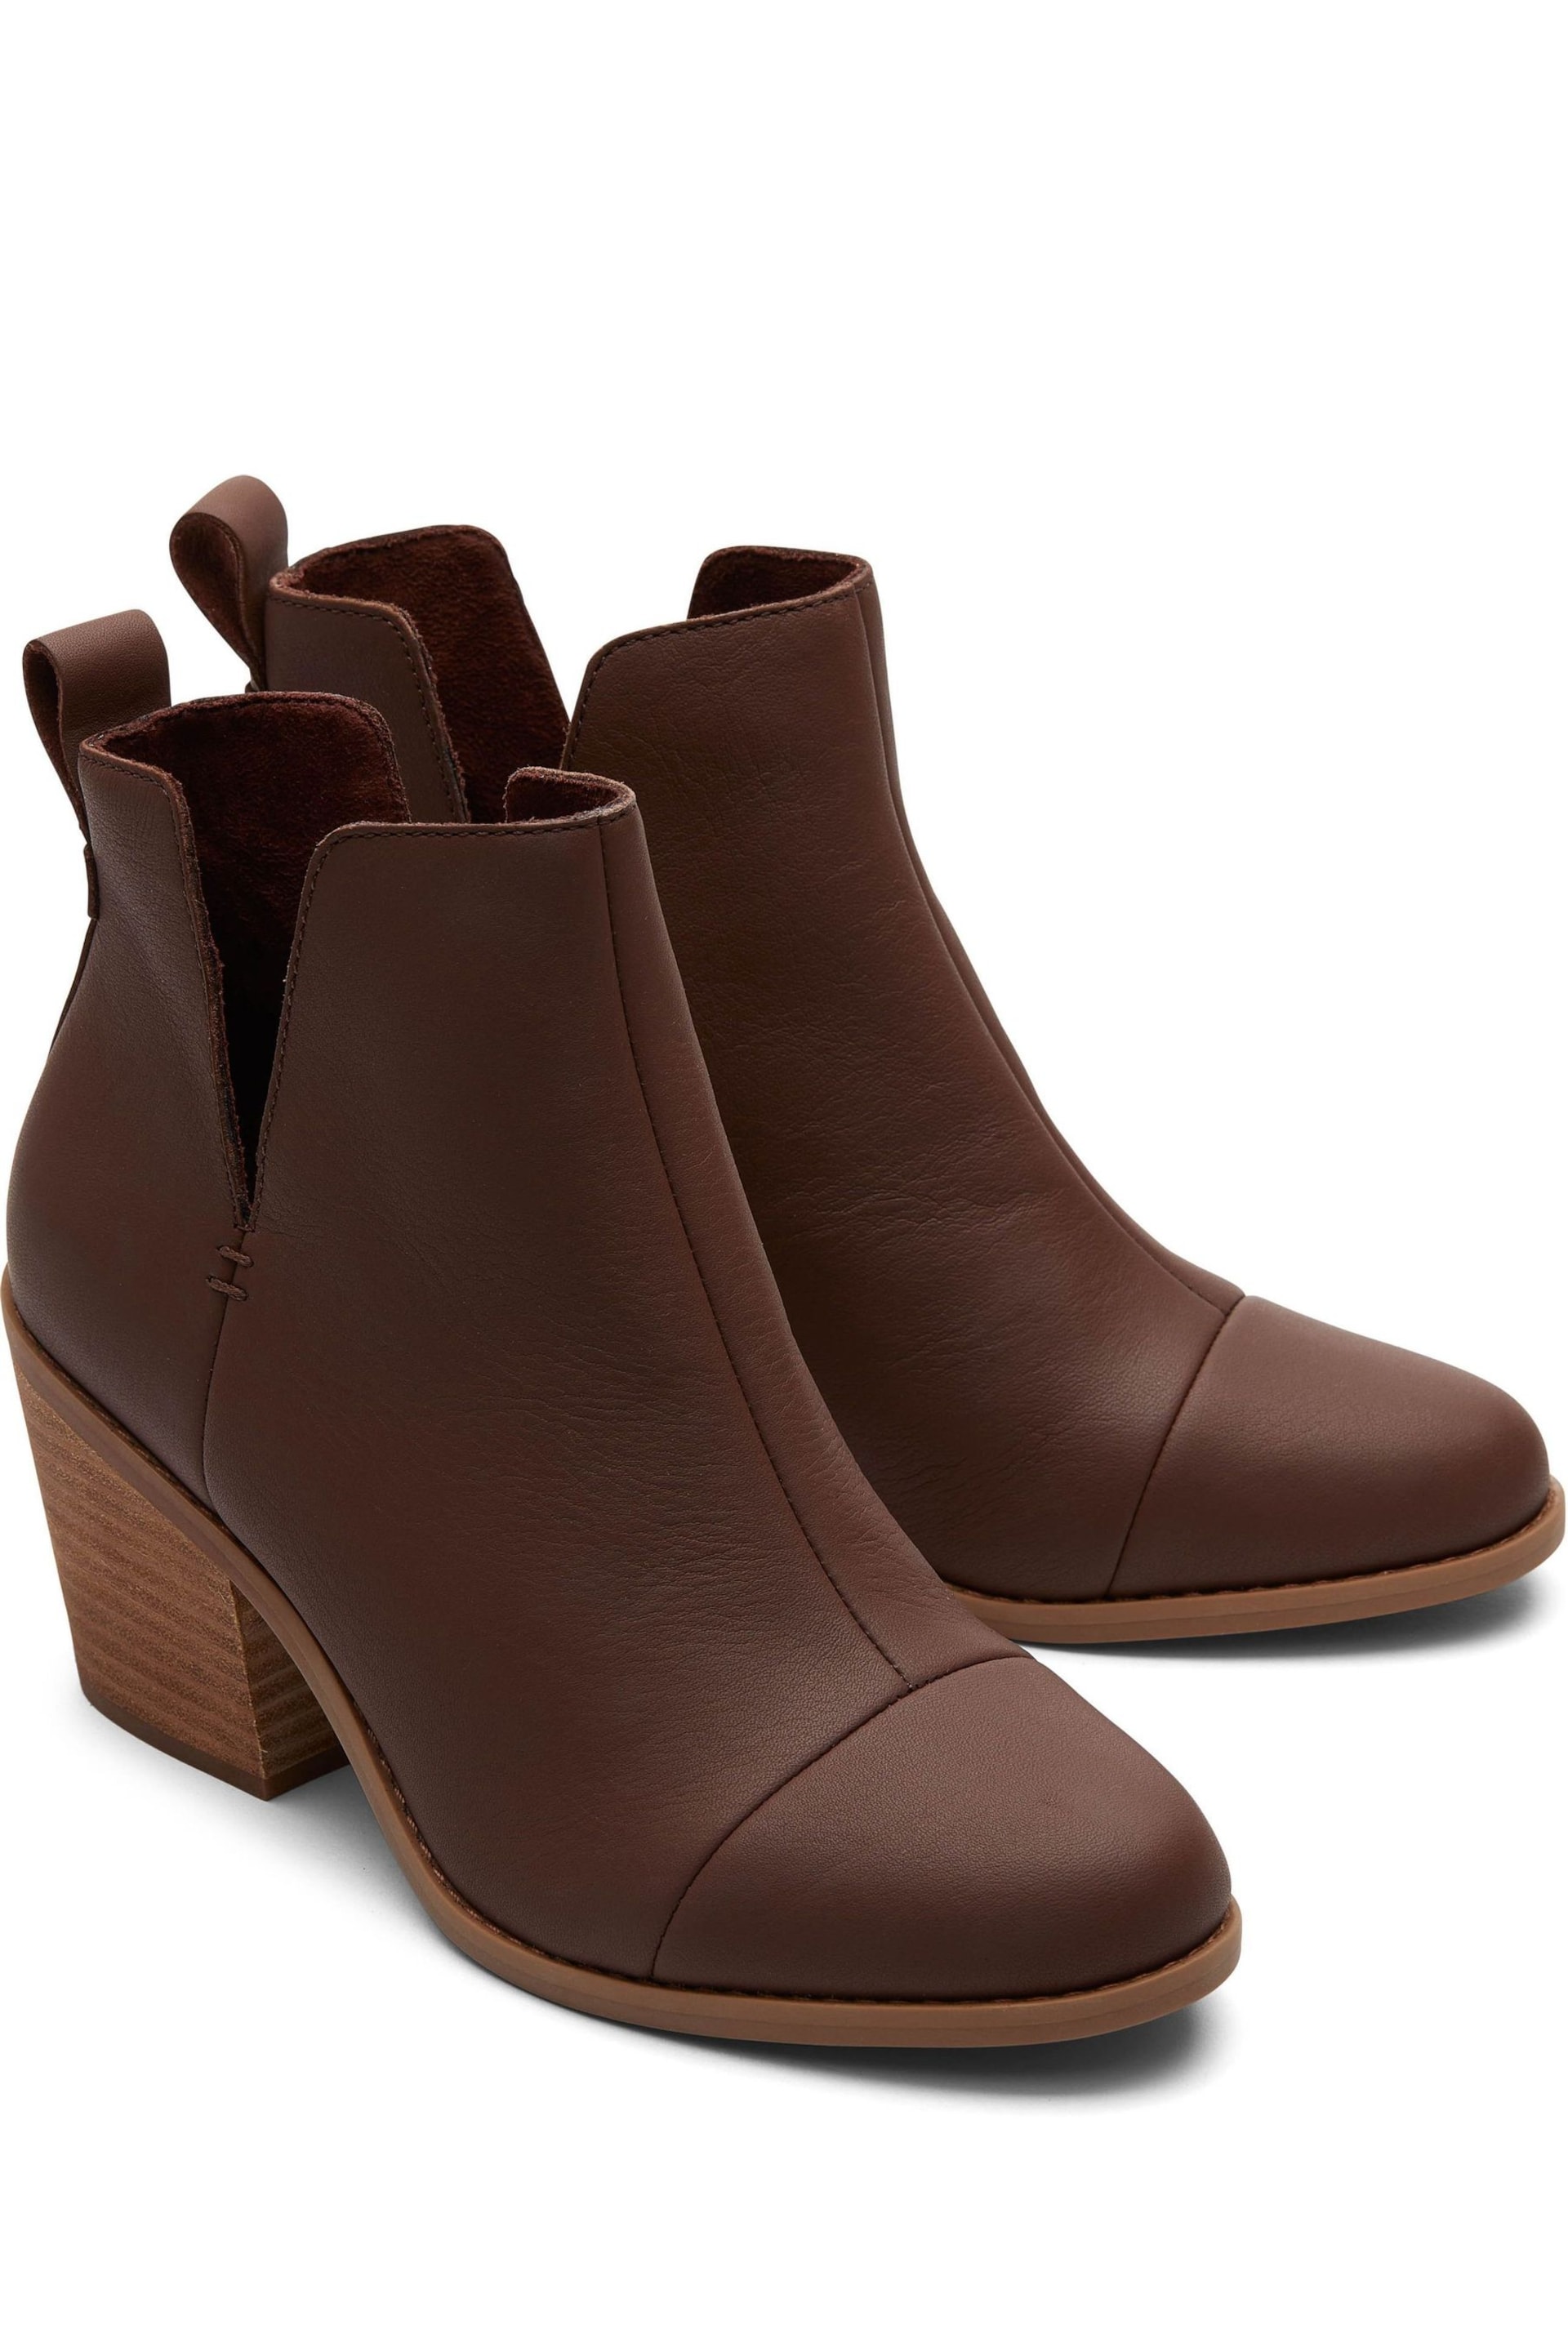 TOMS Everly Cutout Leather Boots - Image 2 of 5